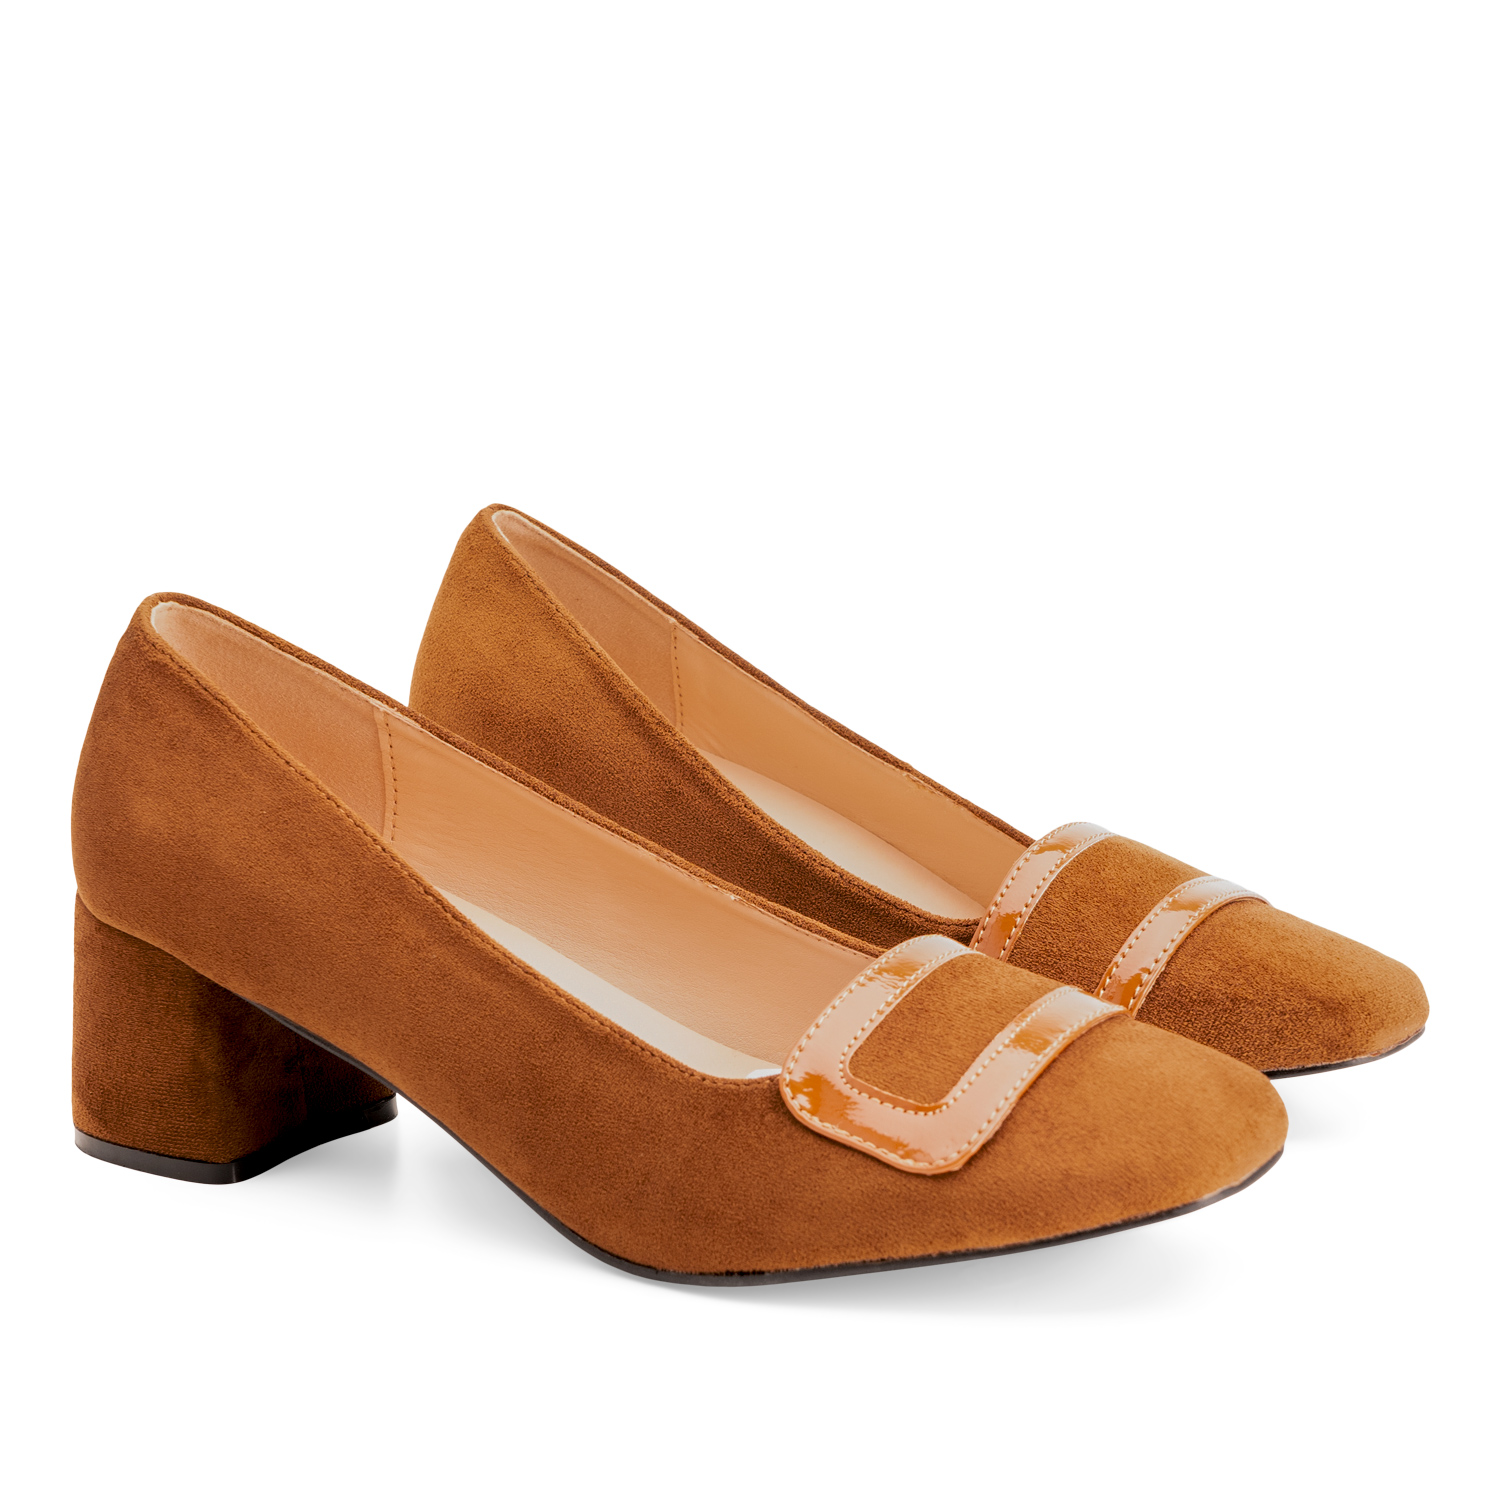 Heeled shoes in camel colored faux suede 